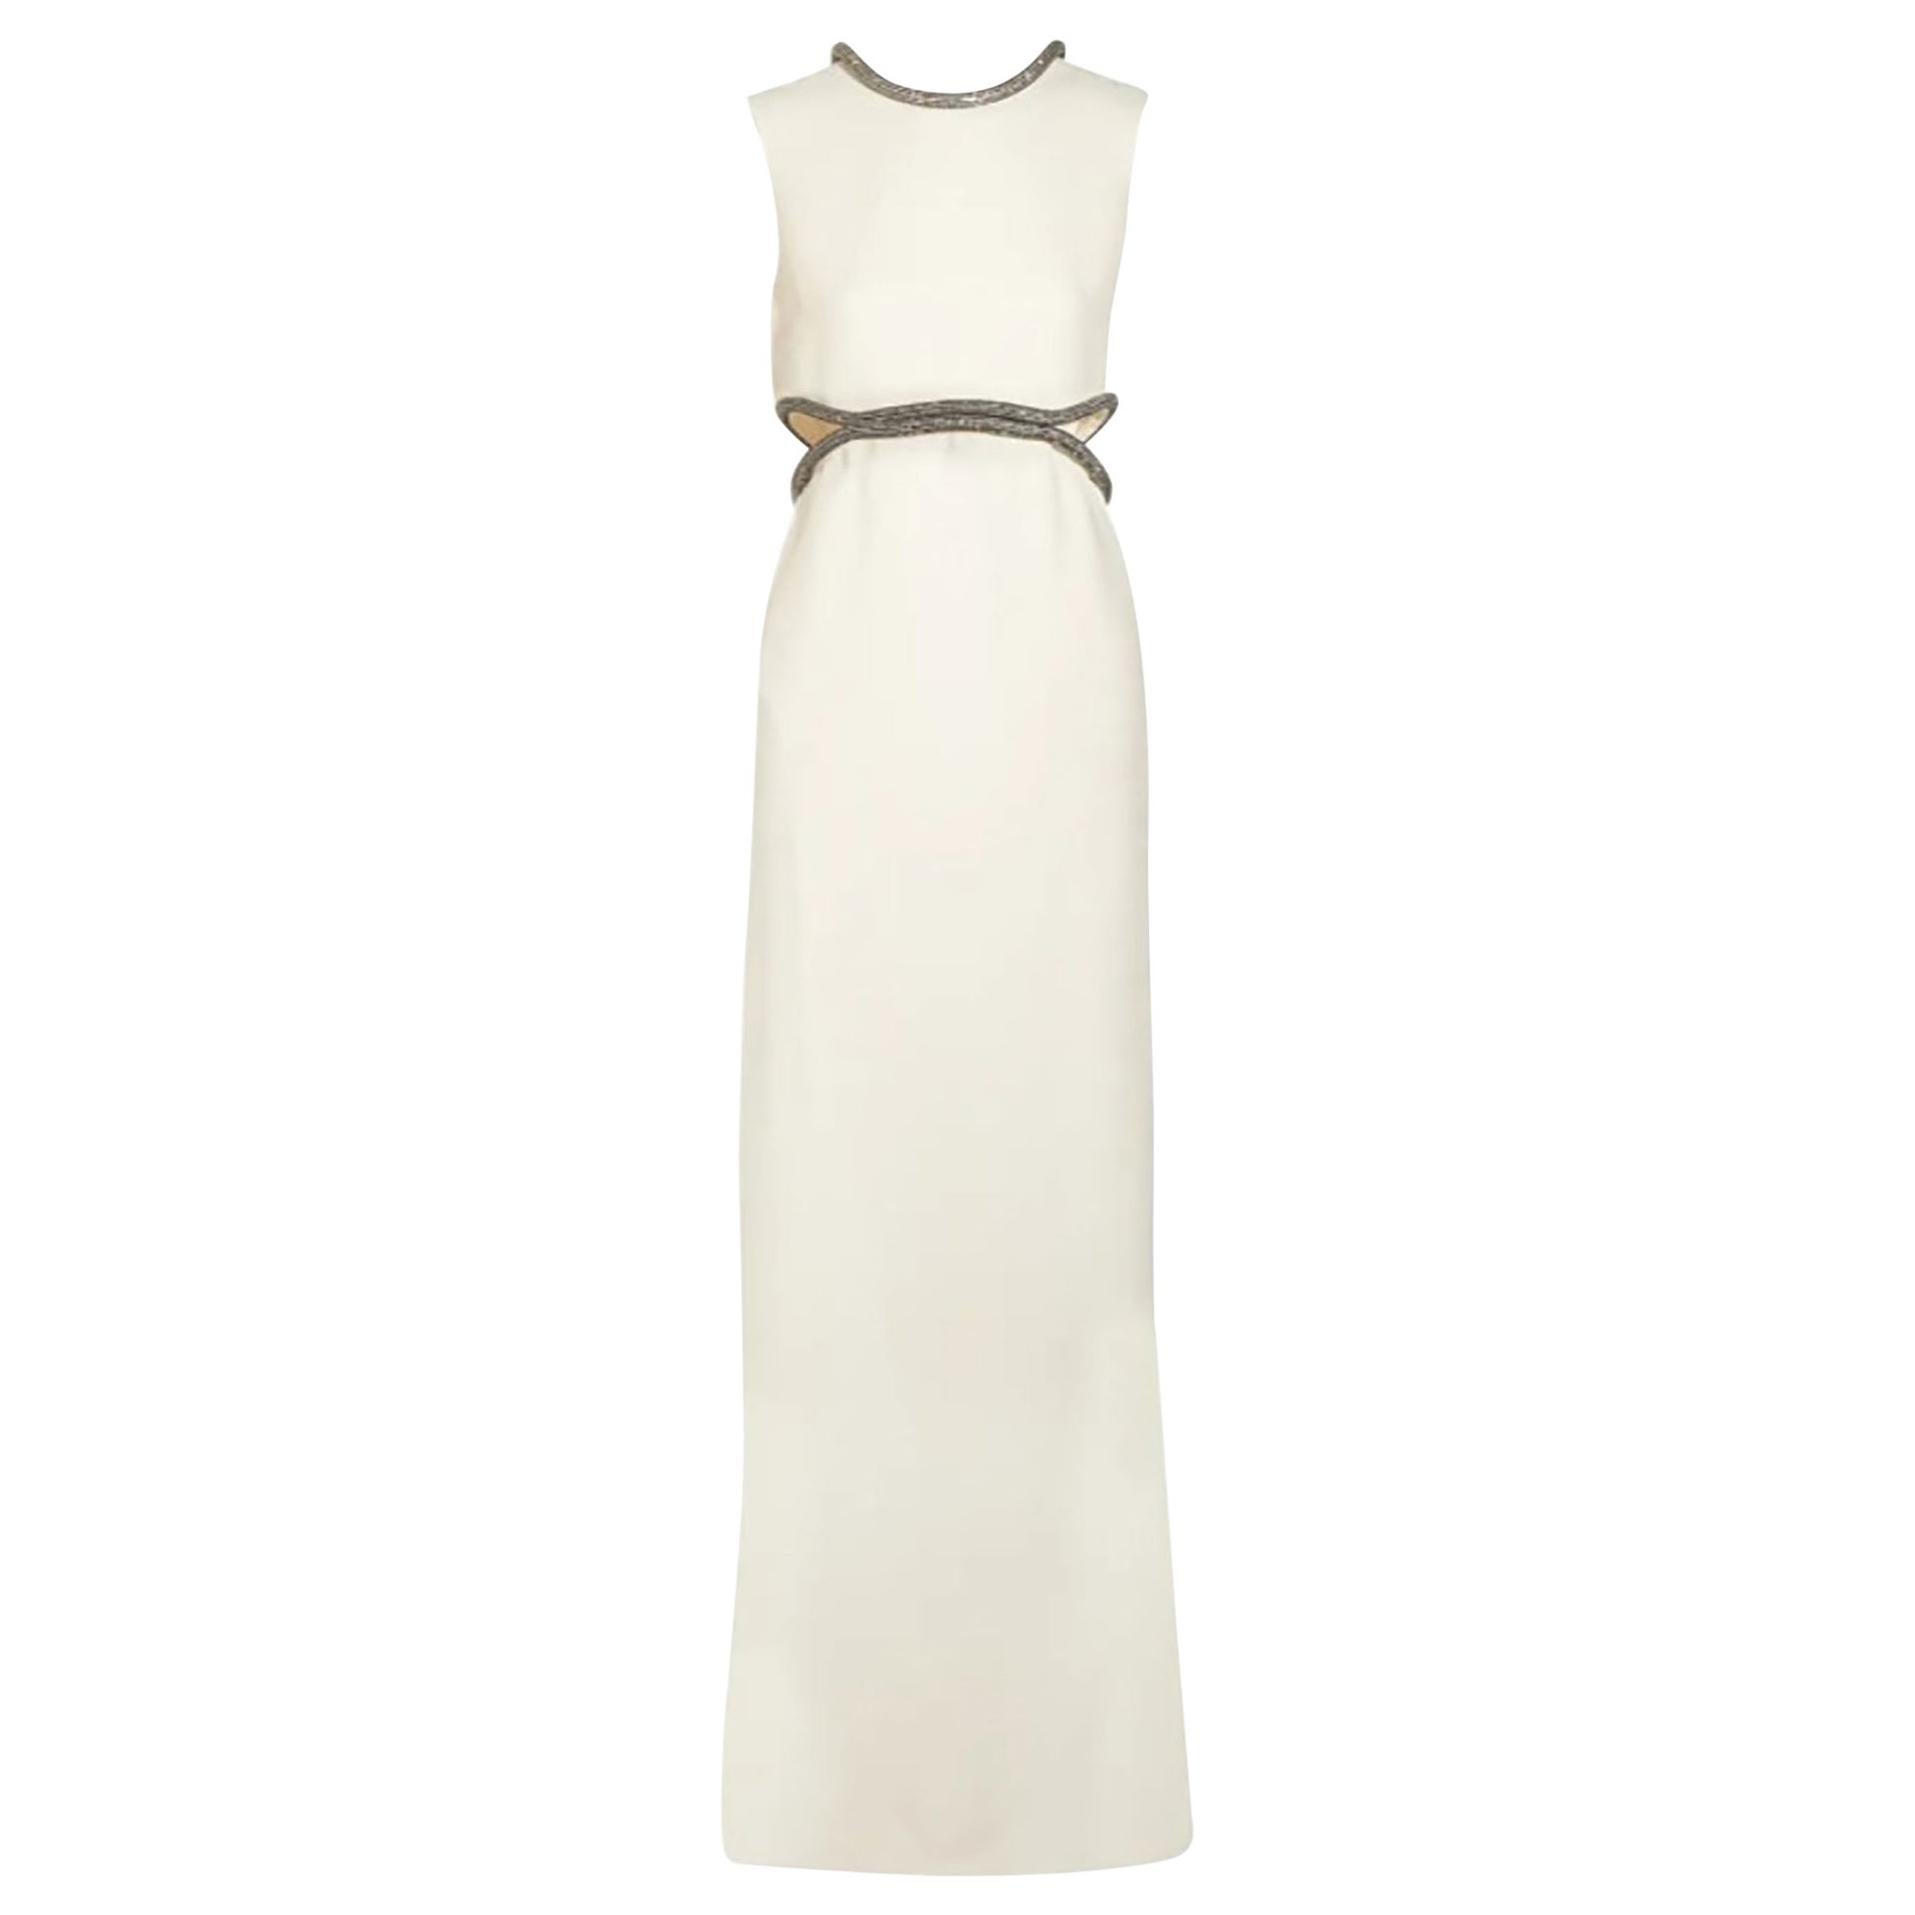 GUCCI CRYSTAL-EMBELLISHED WHITE SILK-CADY DRESS GOWN size IT 38